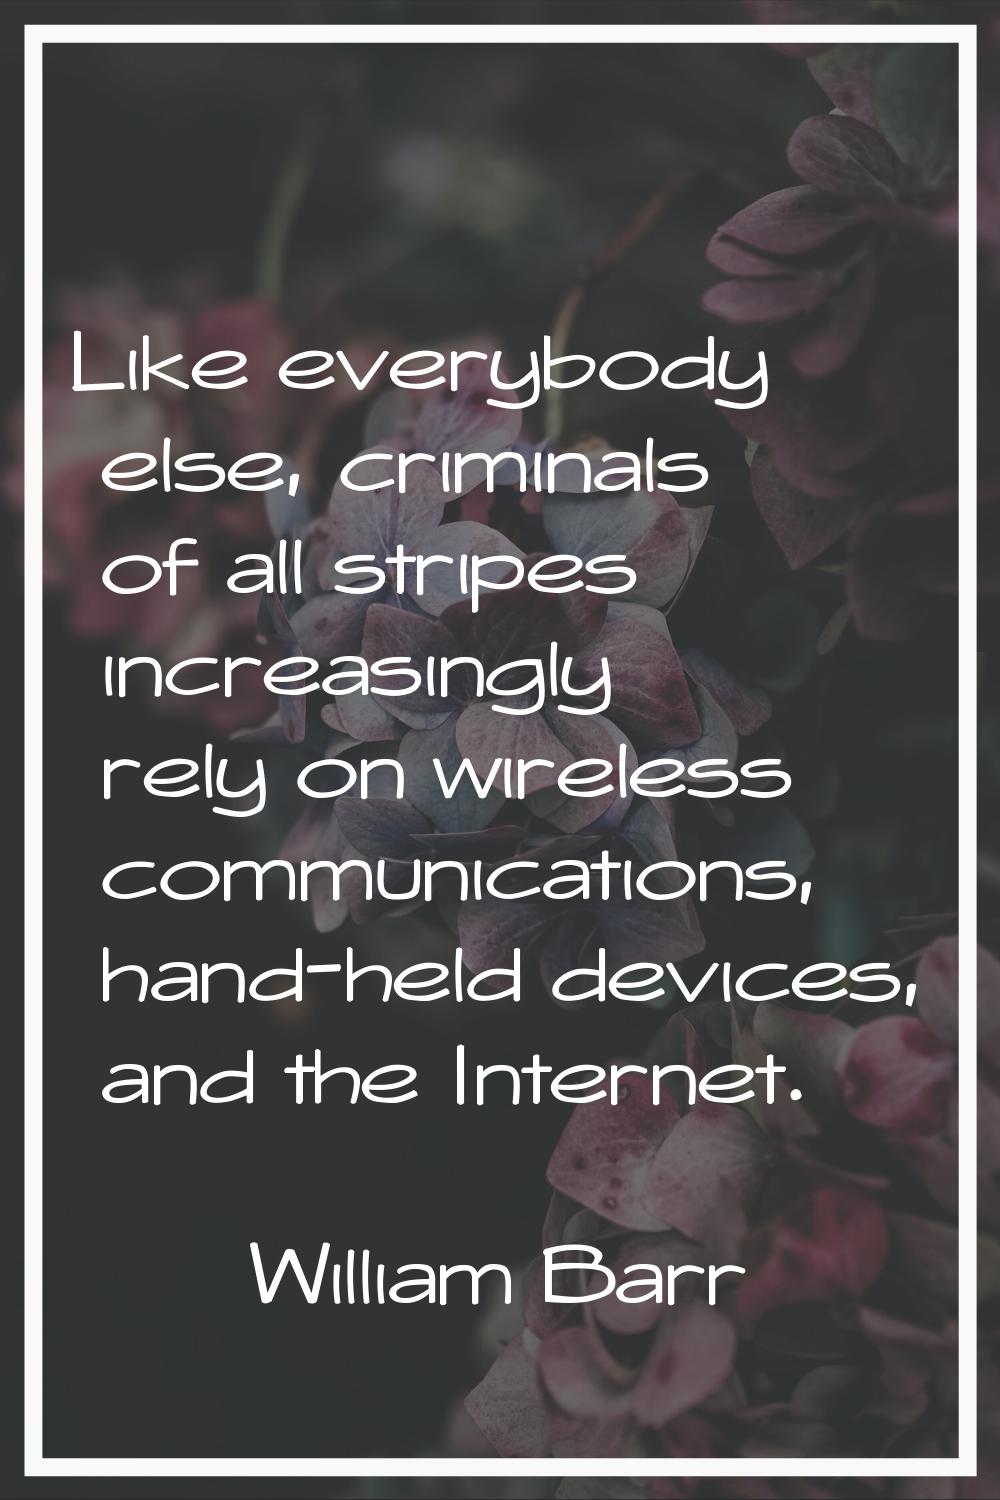 Like everybody else, criminals of all stripes increasingly rely on wireless communications, hand-he